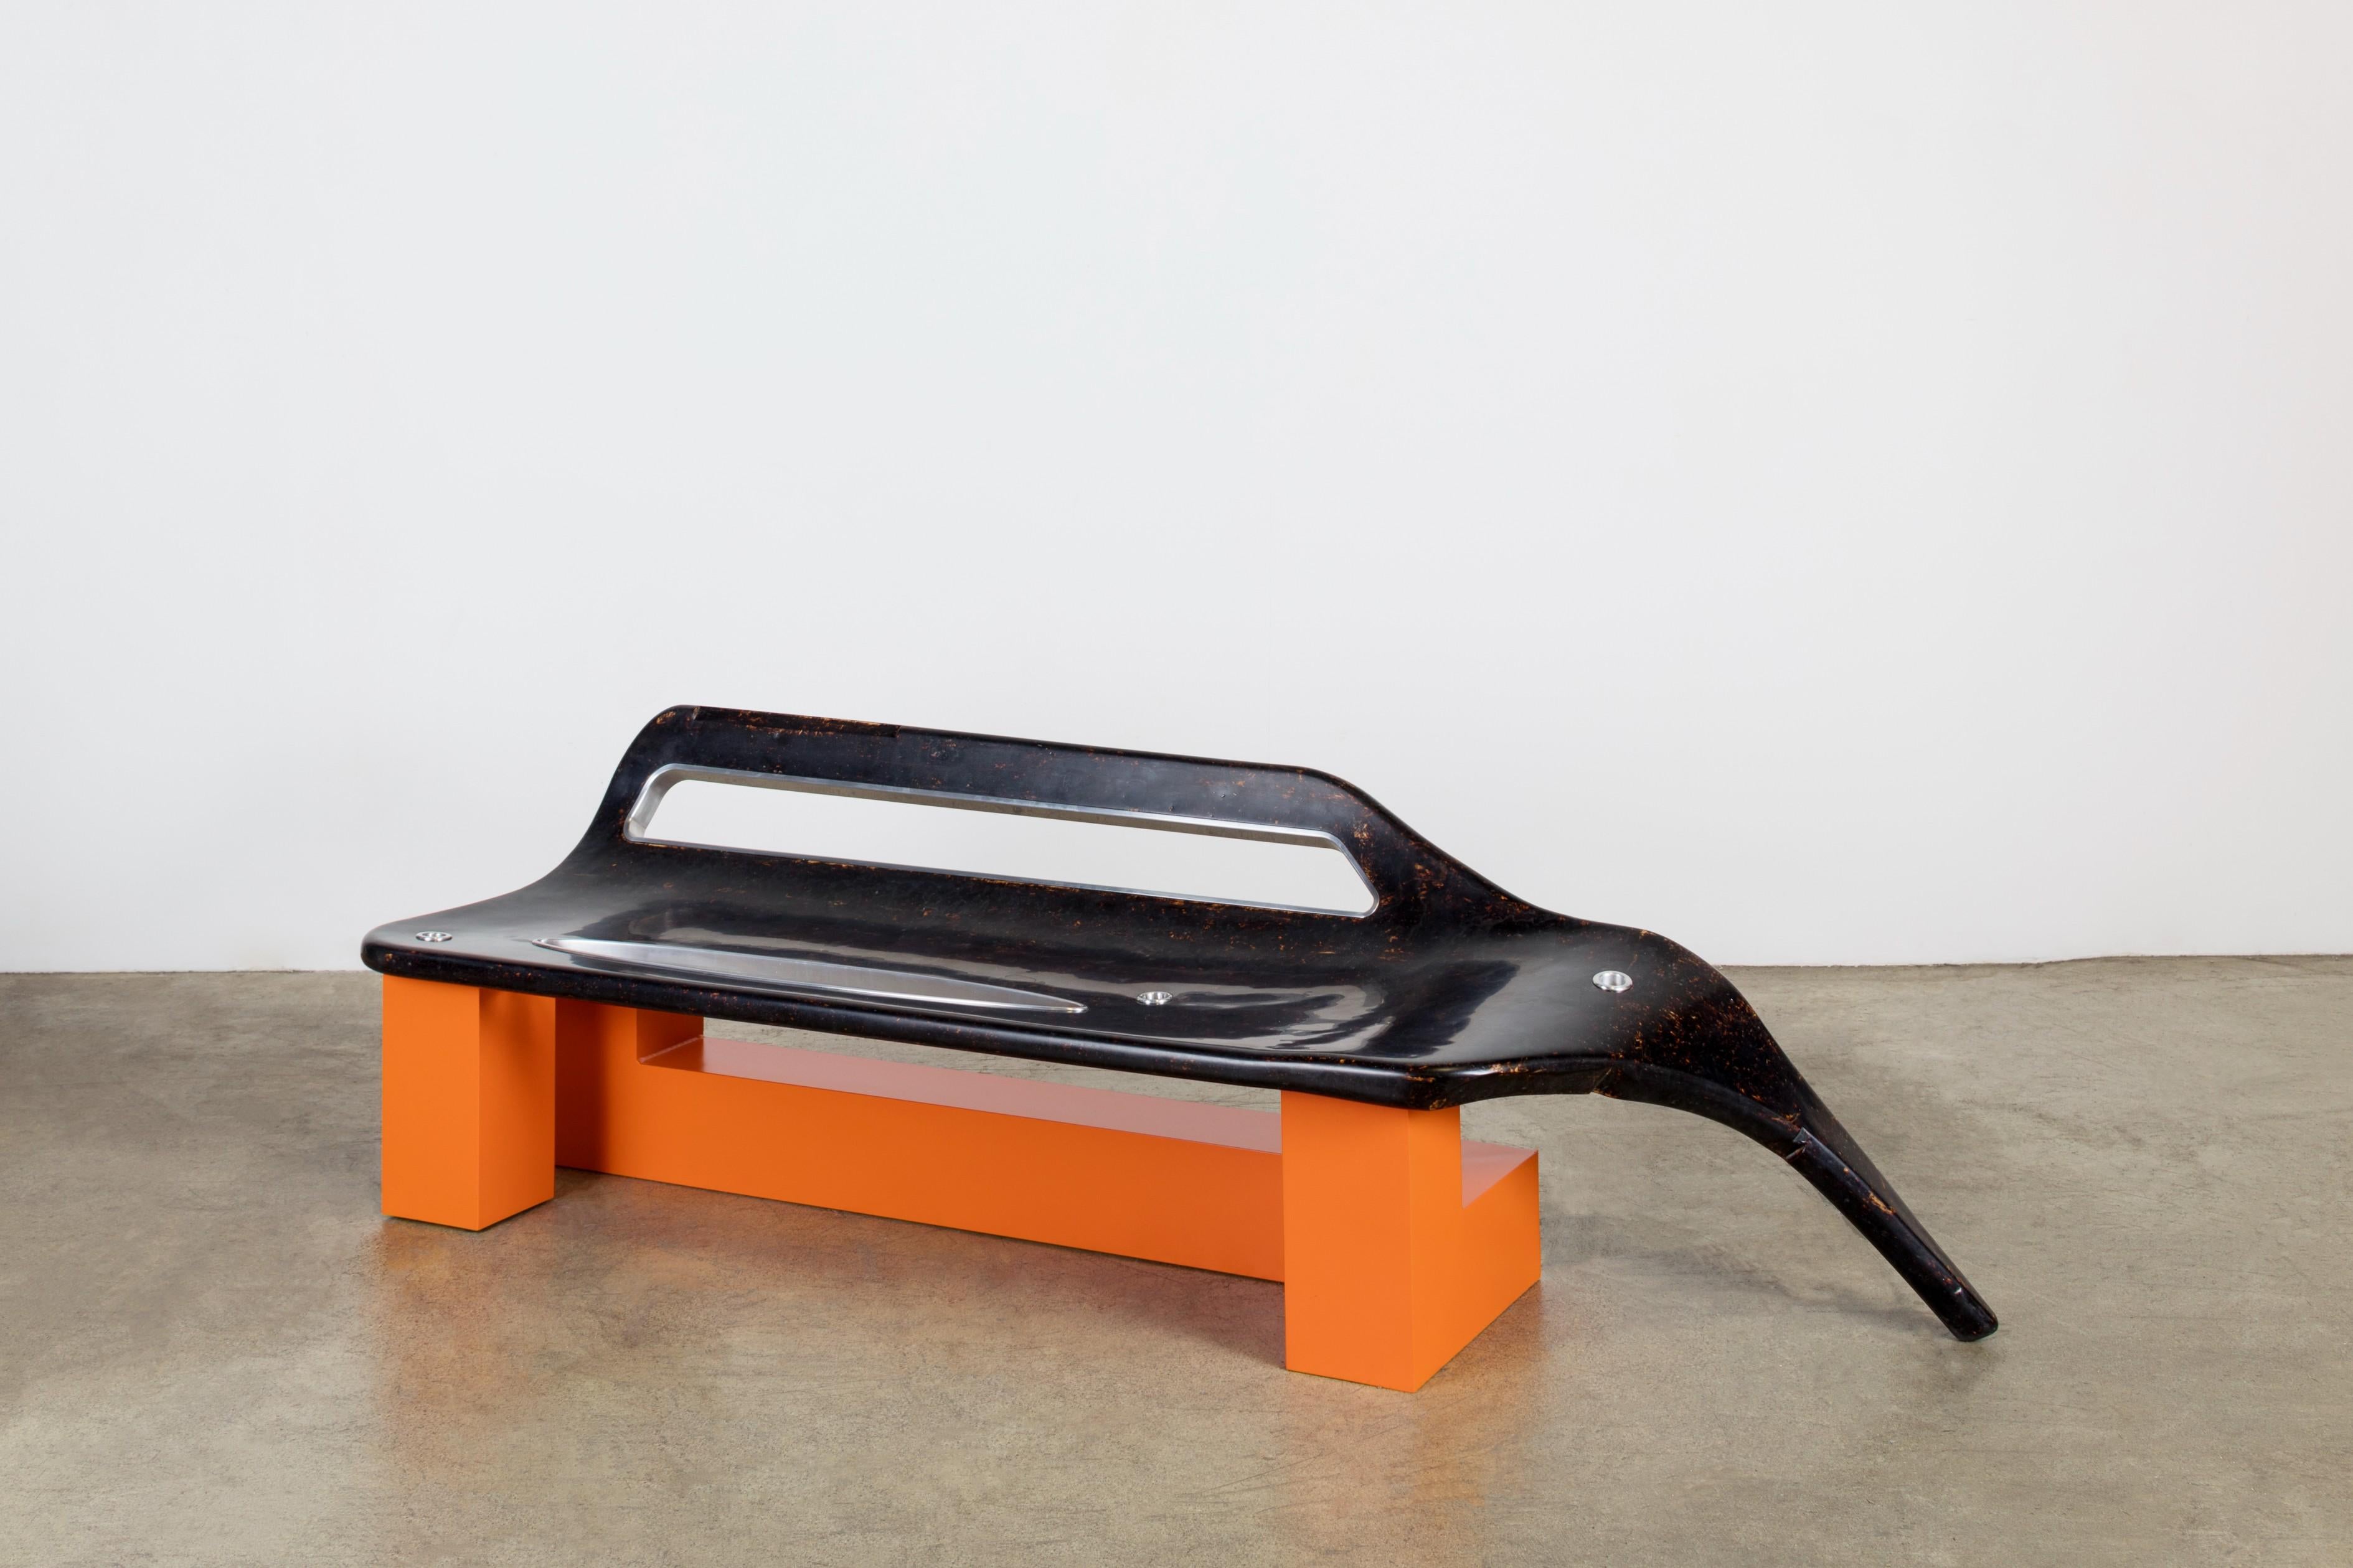 Samuel Ross [British, b. 1991]
Optimistic uncertainties solicit integration, 2021
Fired OSB, powder coated steel, brushed steel
77 x 22.5 x 23 inches
195.5 x 57 x 58.5 cm
Edition of 8